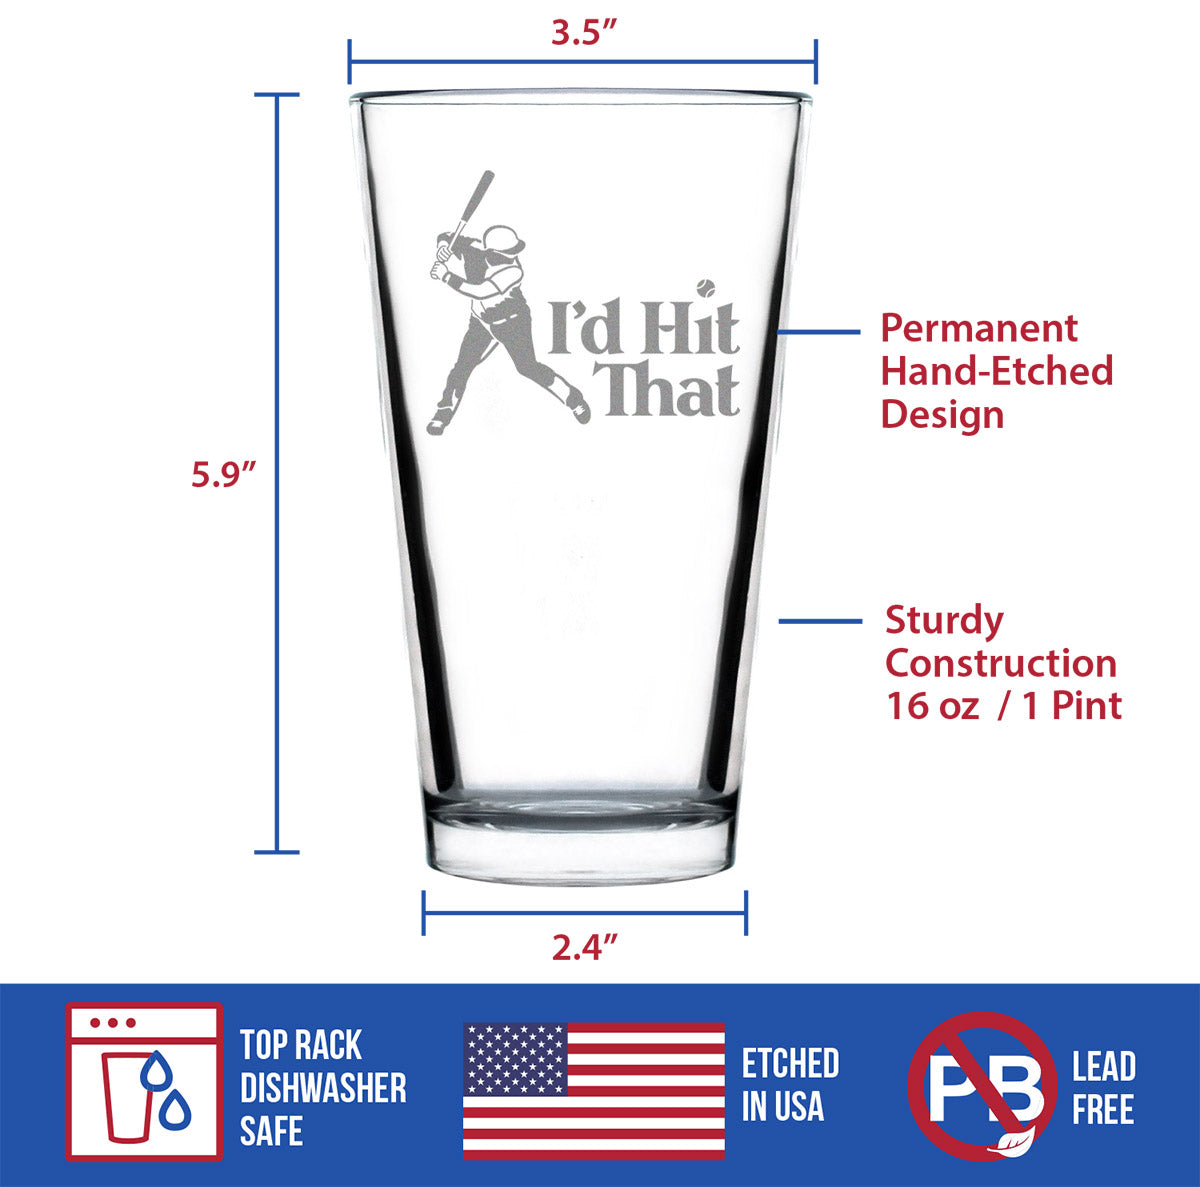 I&#39;d Hit That - Pint Glass for Beer - Baseball Themed Gifts and Sports Decor - 16 oz Glasses